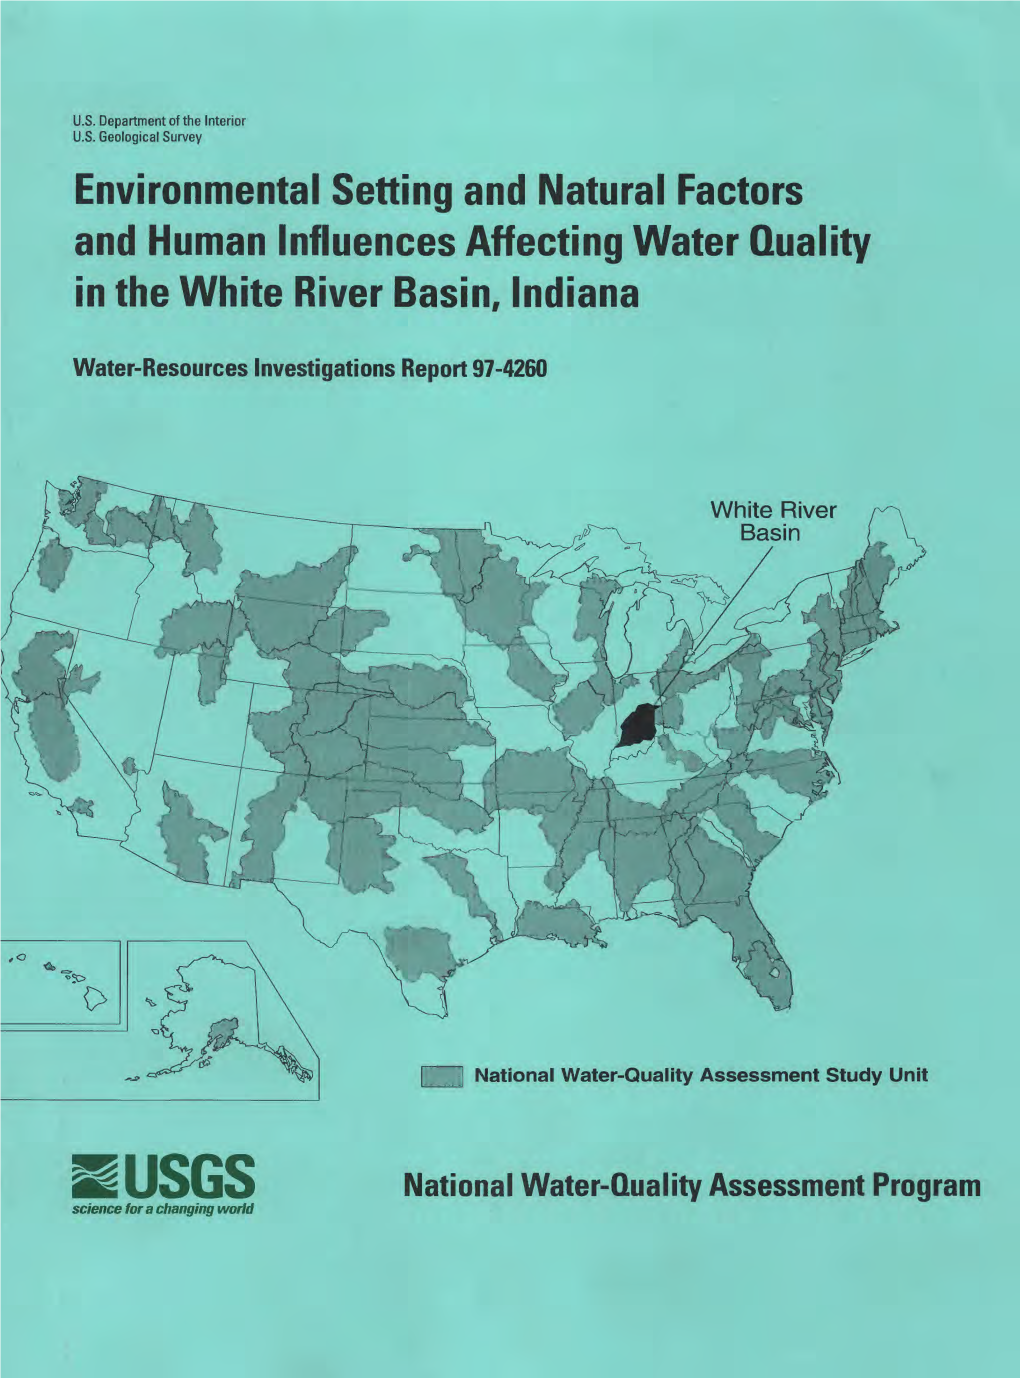 Environmental Setting and Natural Factors and Human Influences Affecting Water Quality in the White River Basin, Indiana